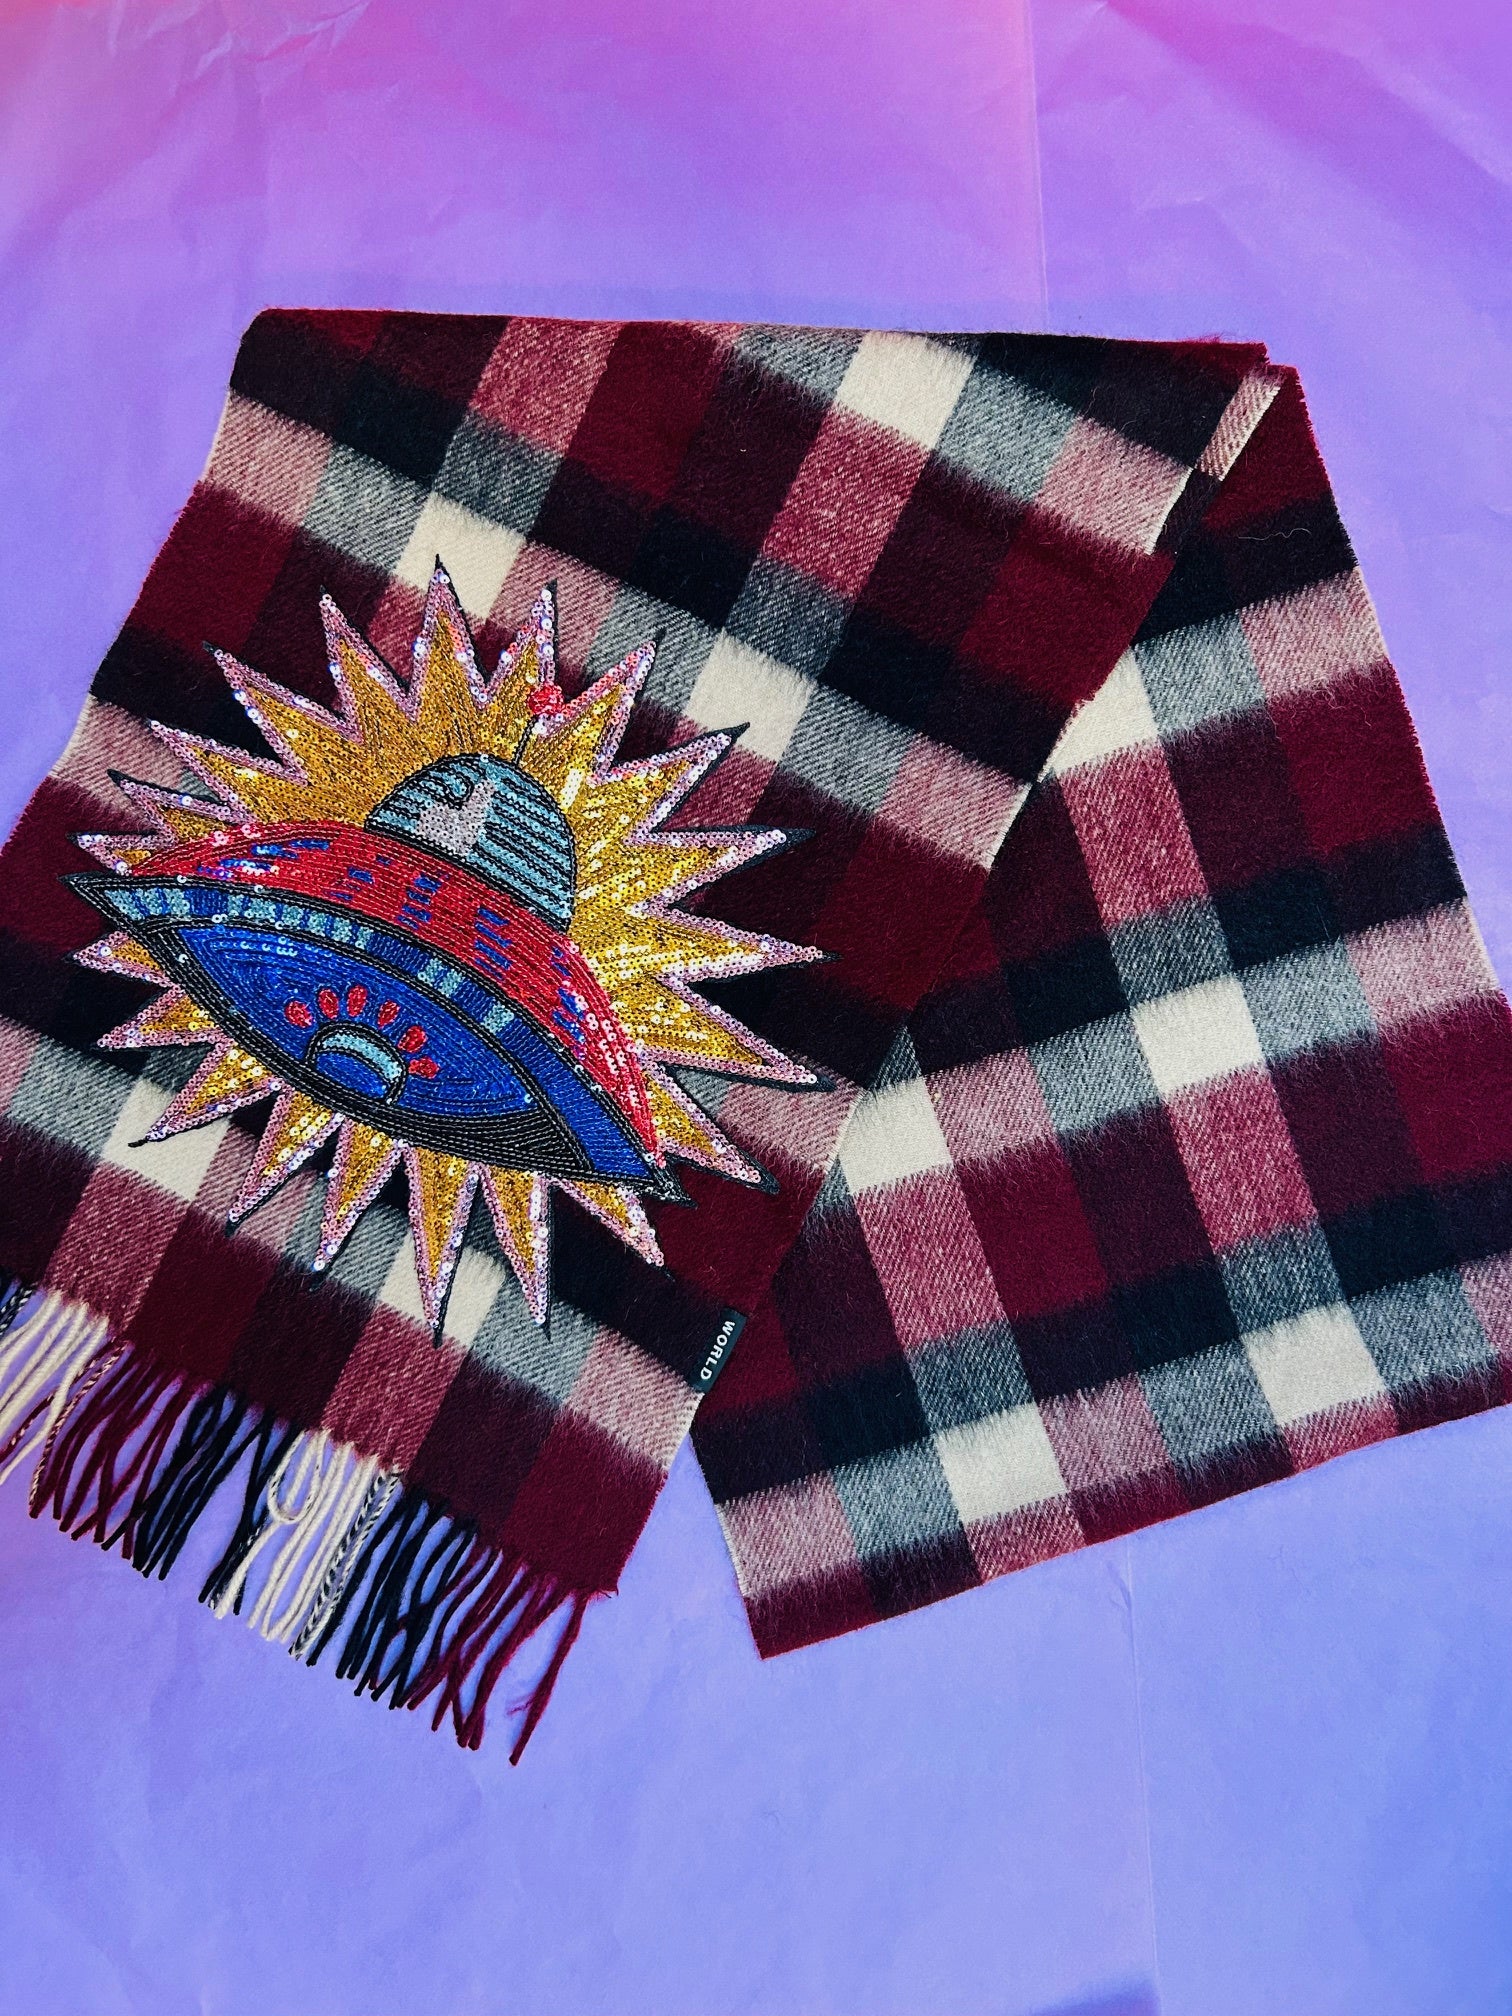 WORLD 24 Lambswool COUTURE Scarf - Red Black Check w/UFO